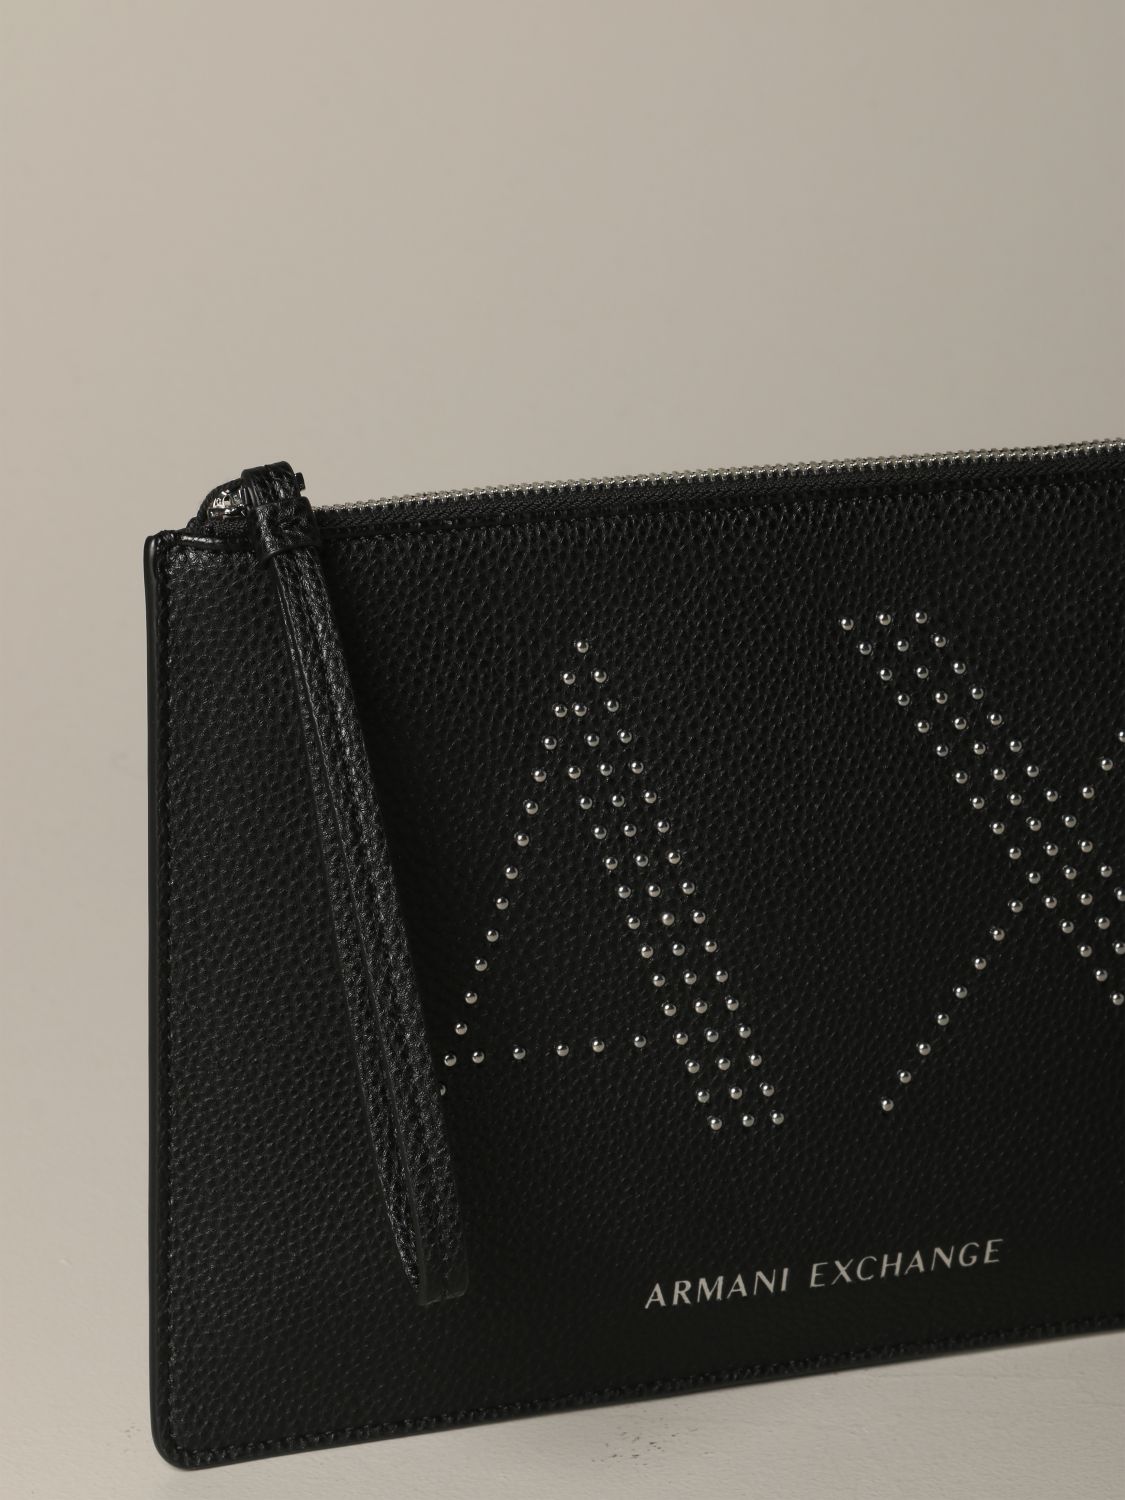 Armani Exchange Outlet: clutch bag in synthetic leather with AX logo -  Black | Armani Exchange mini bag 948021 CC284 online on 